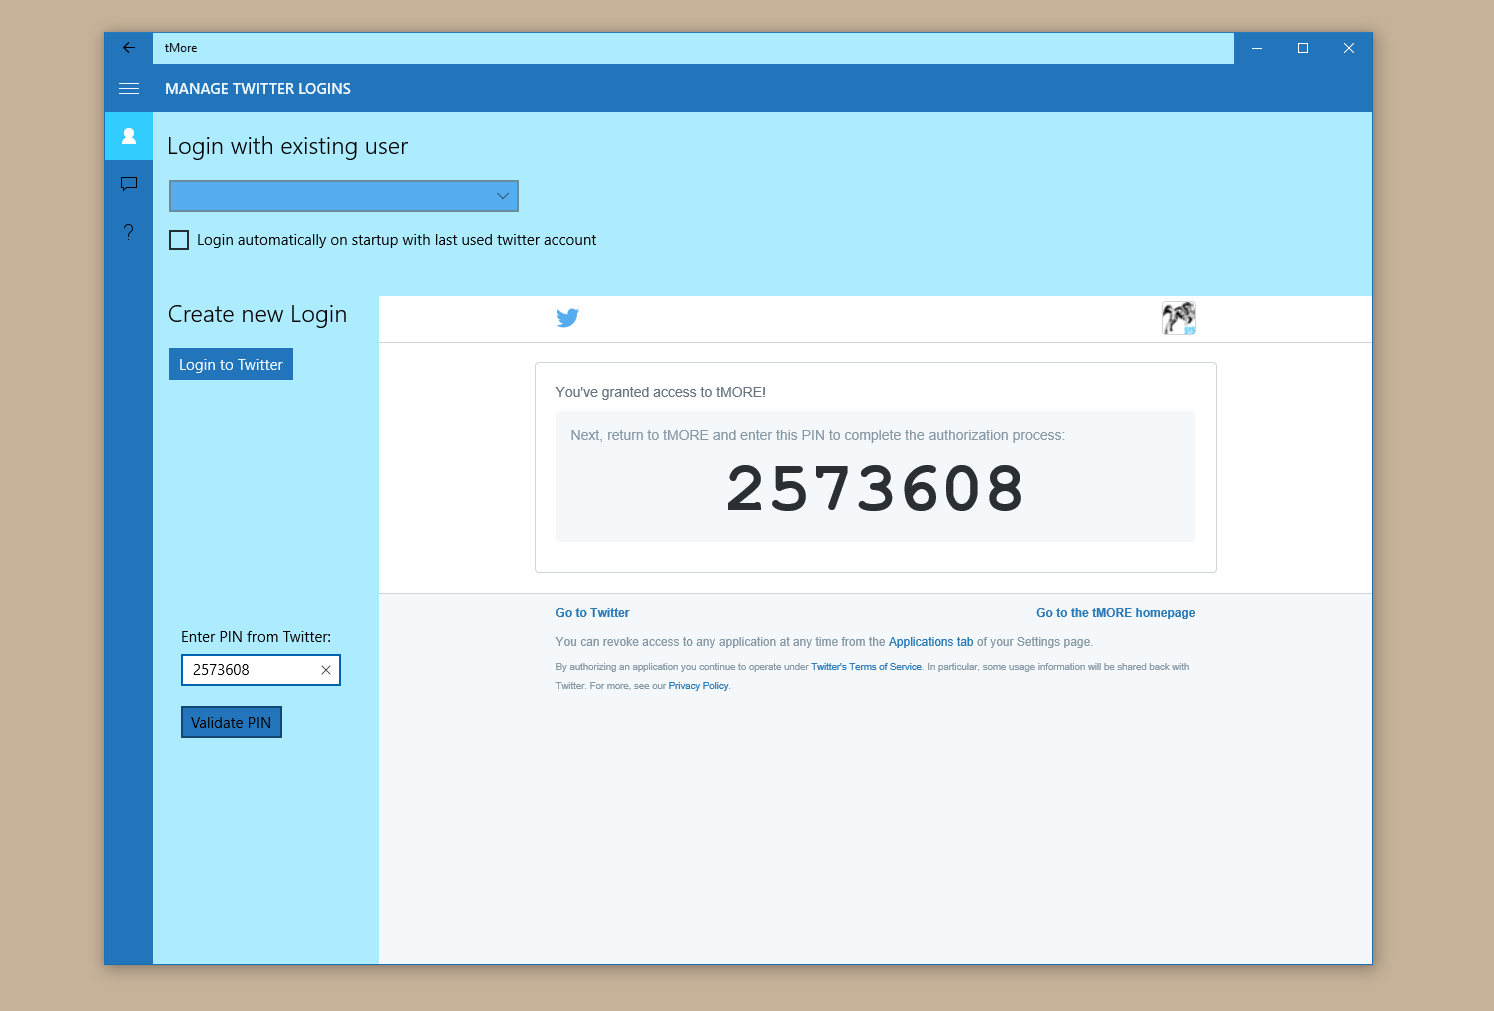 PIN validation: re-enter the PIN that Twitter has created for this login